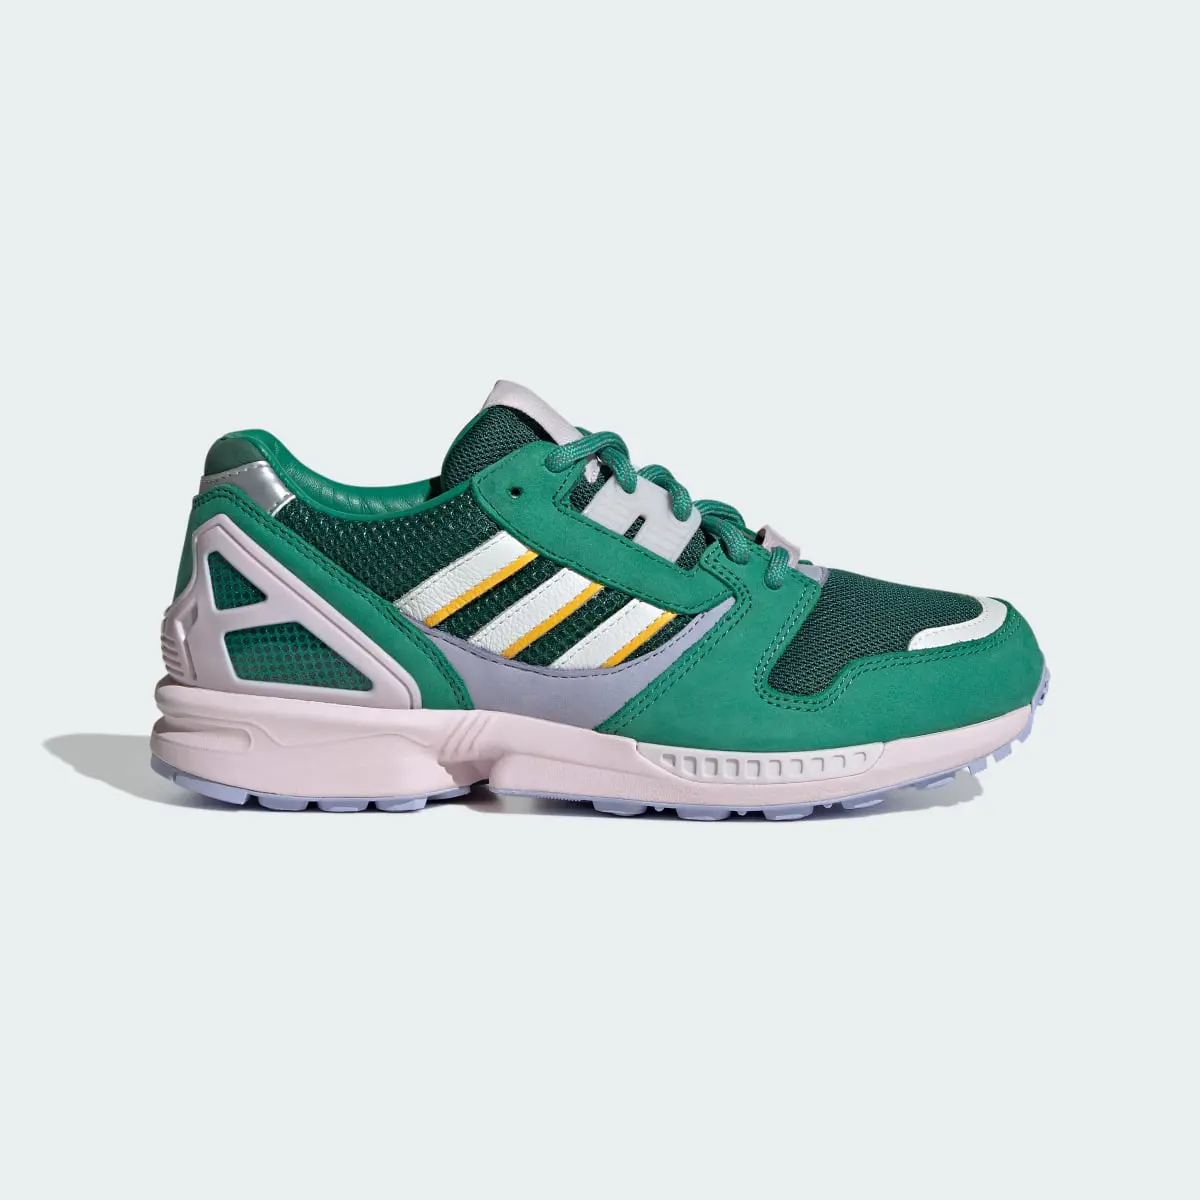 Adidas ZX 8000 Shoes. 2